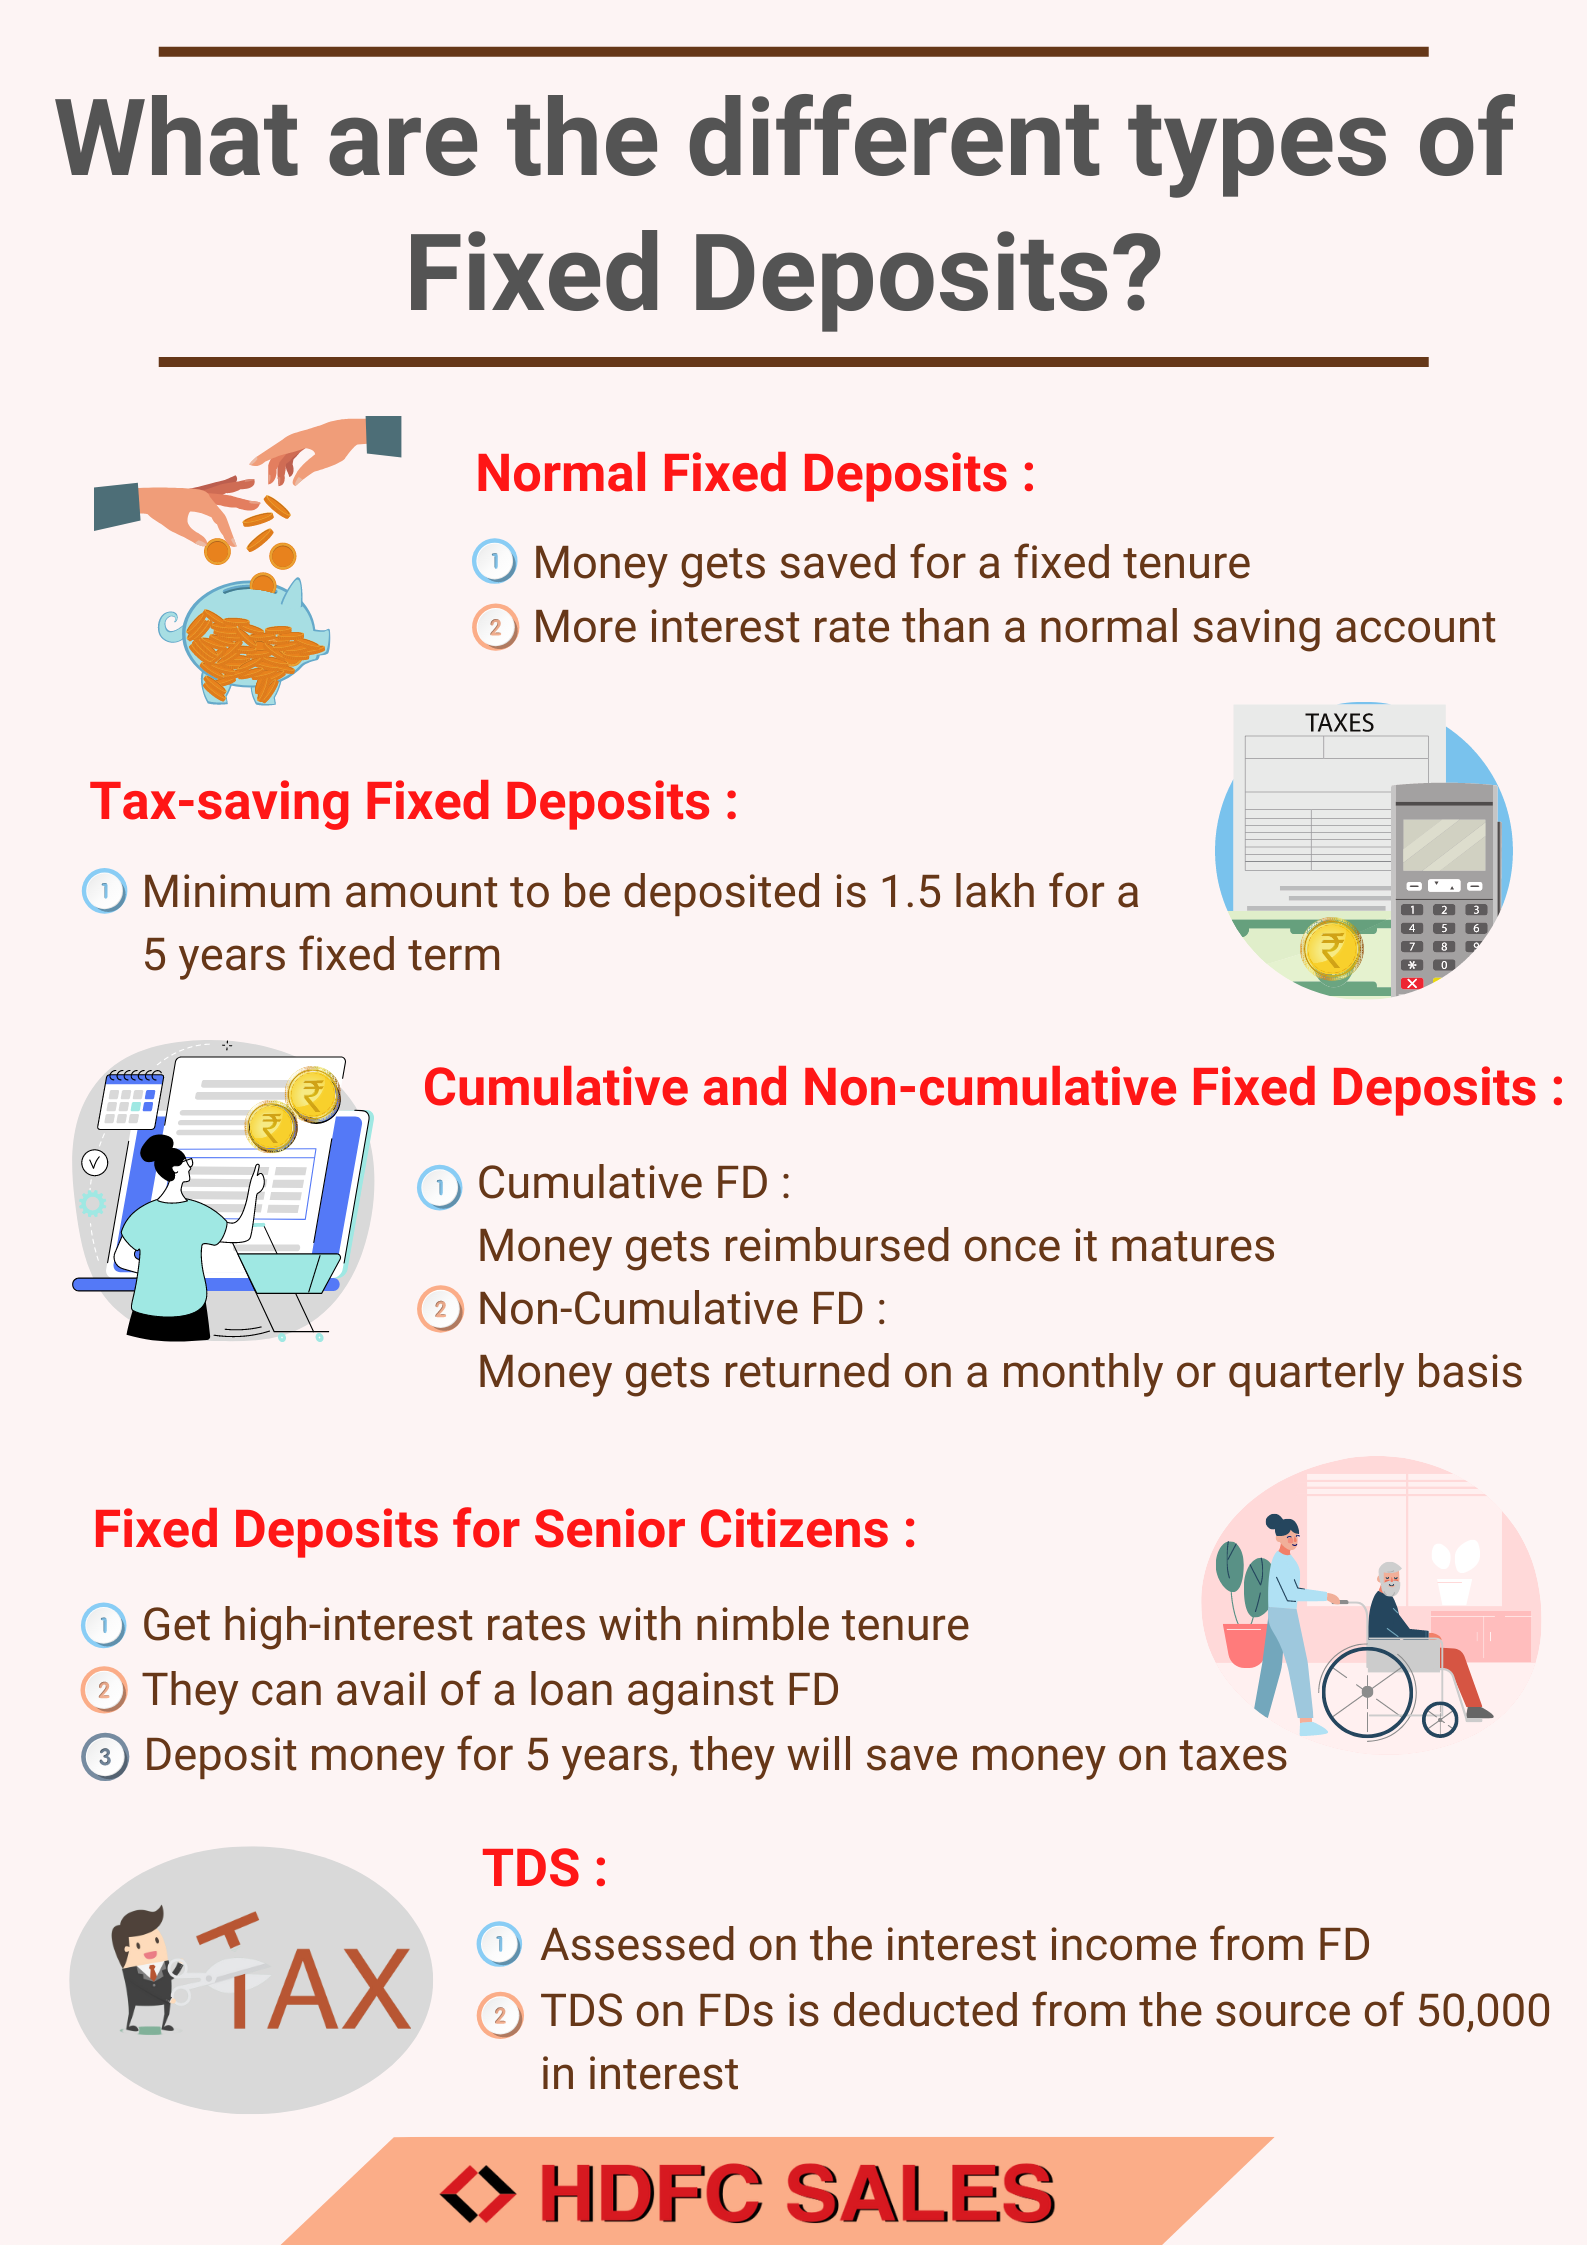 Different types of fixed deposits